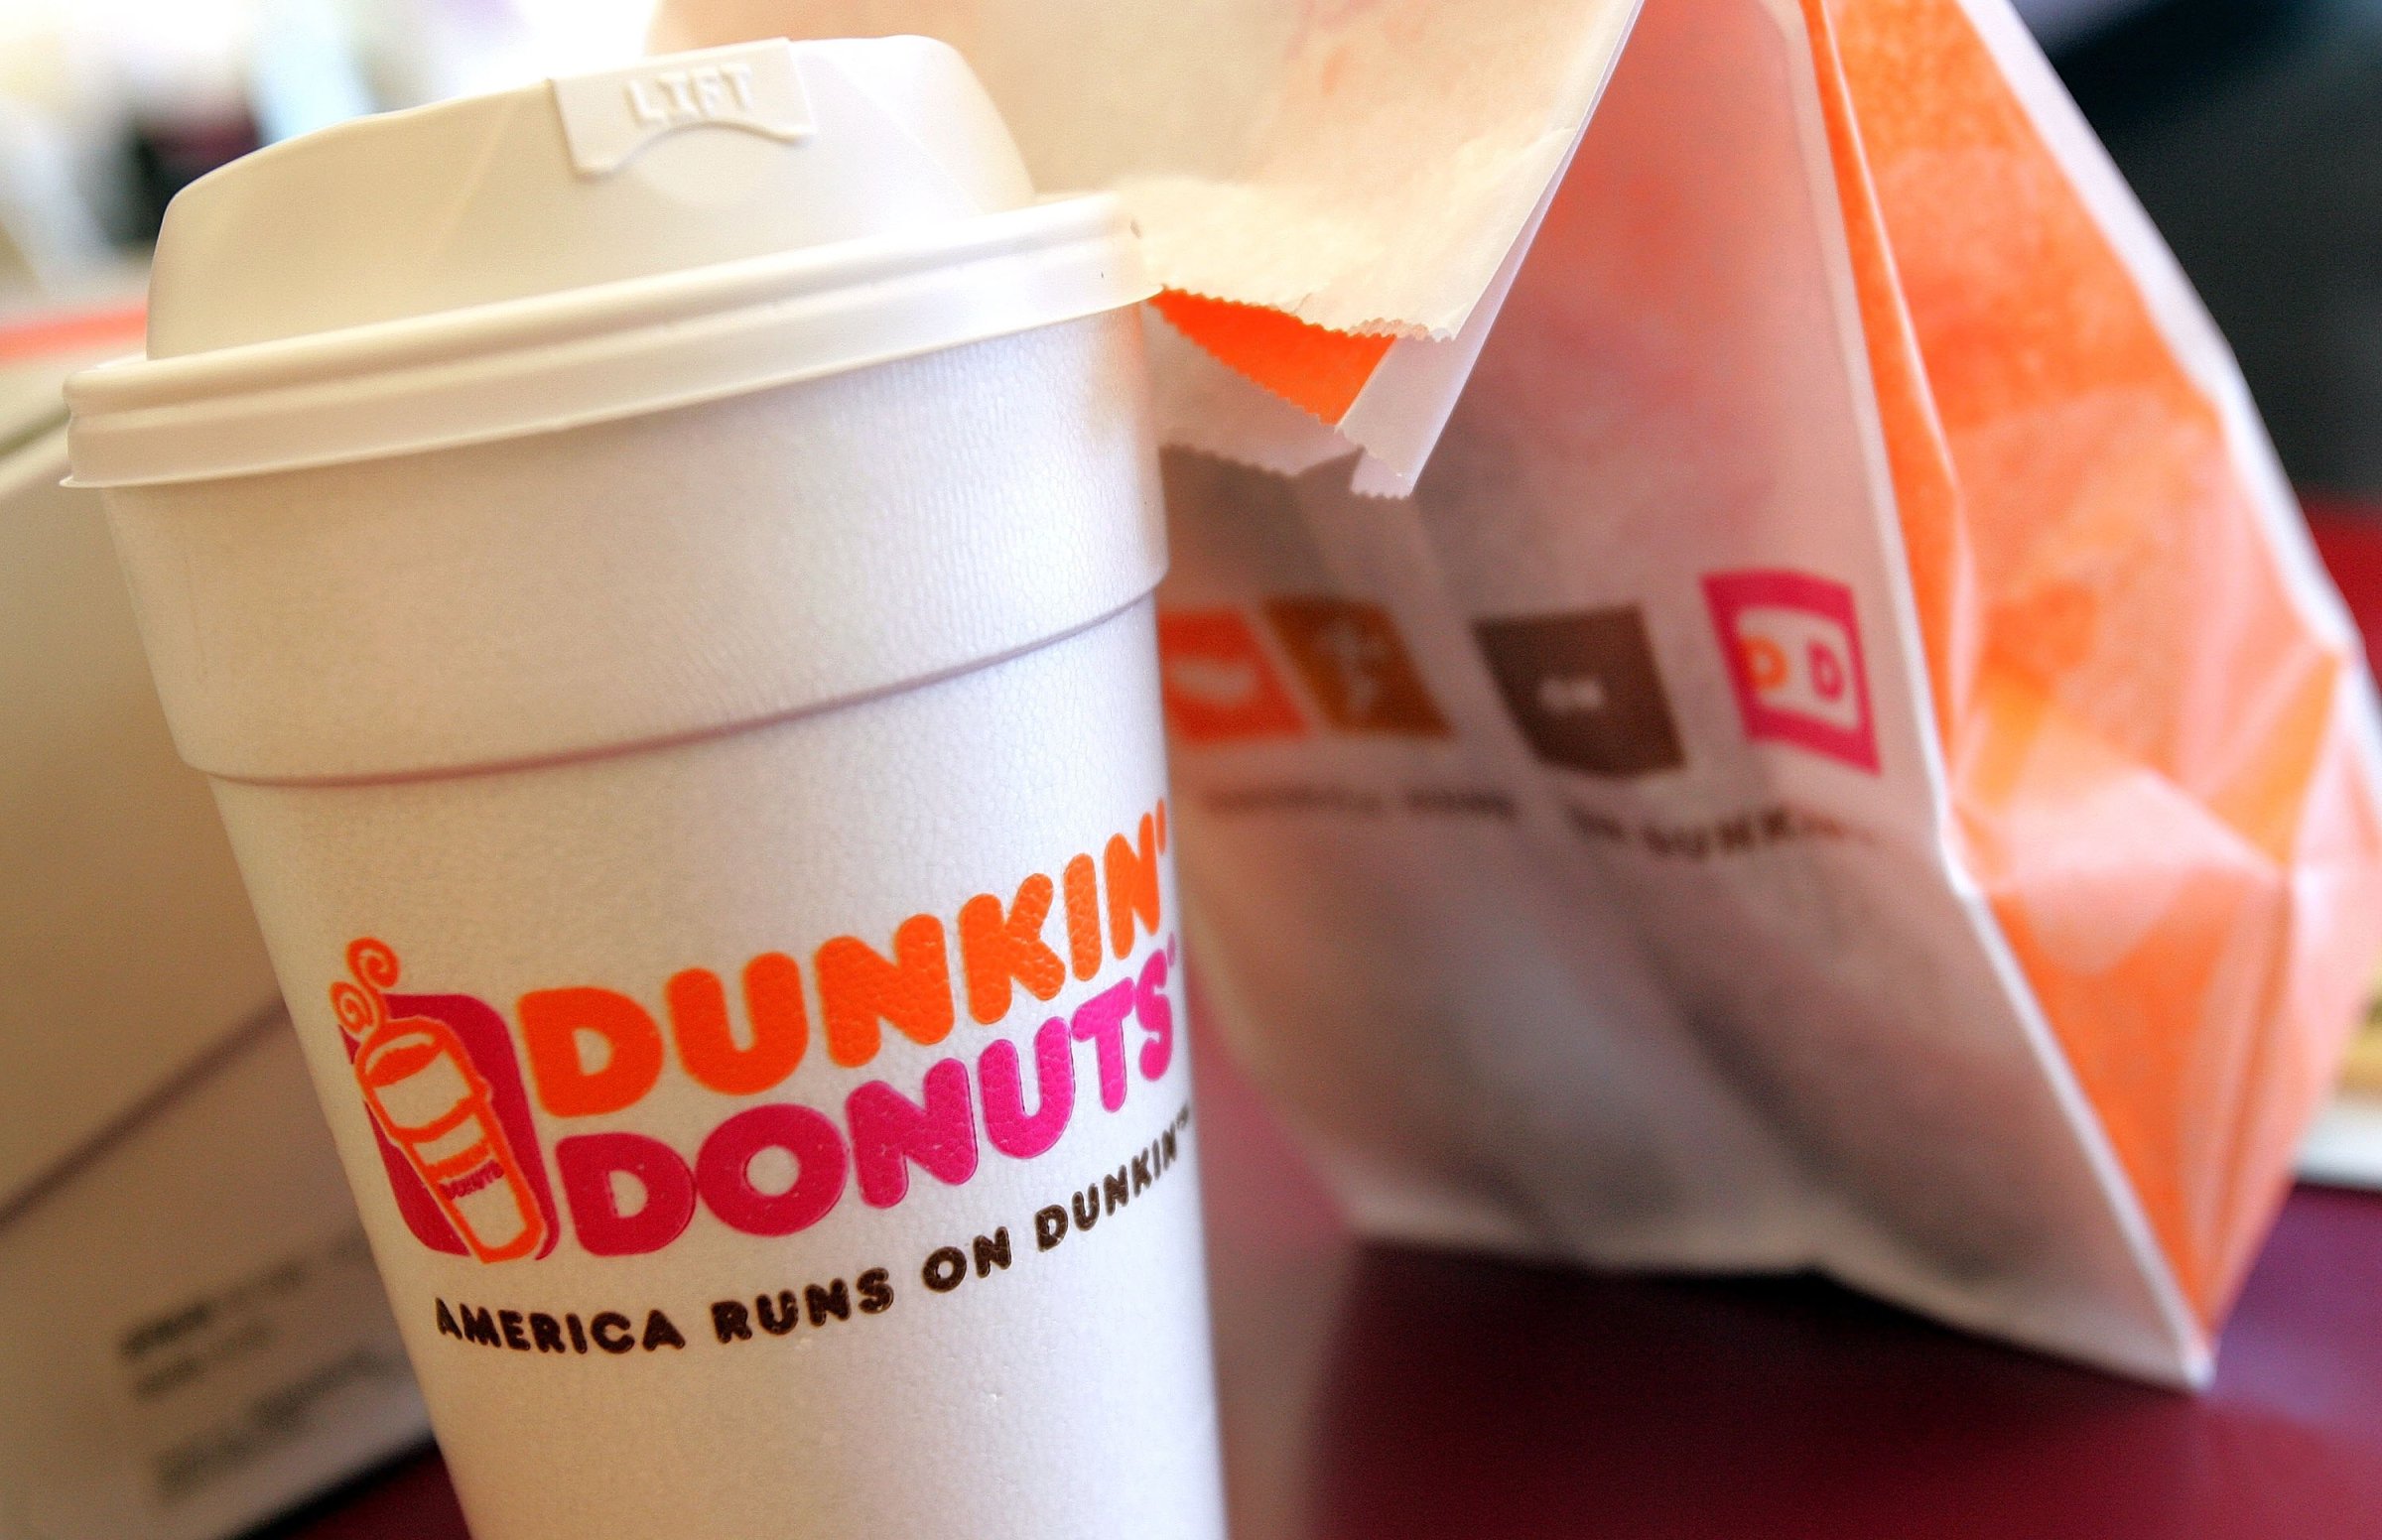 Dunkin' Donuts To Challenge Starbucks For Coffee Supremacy